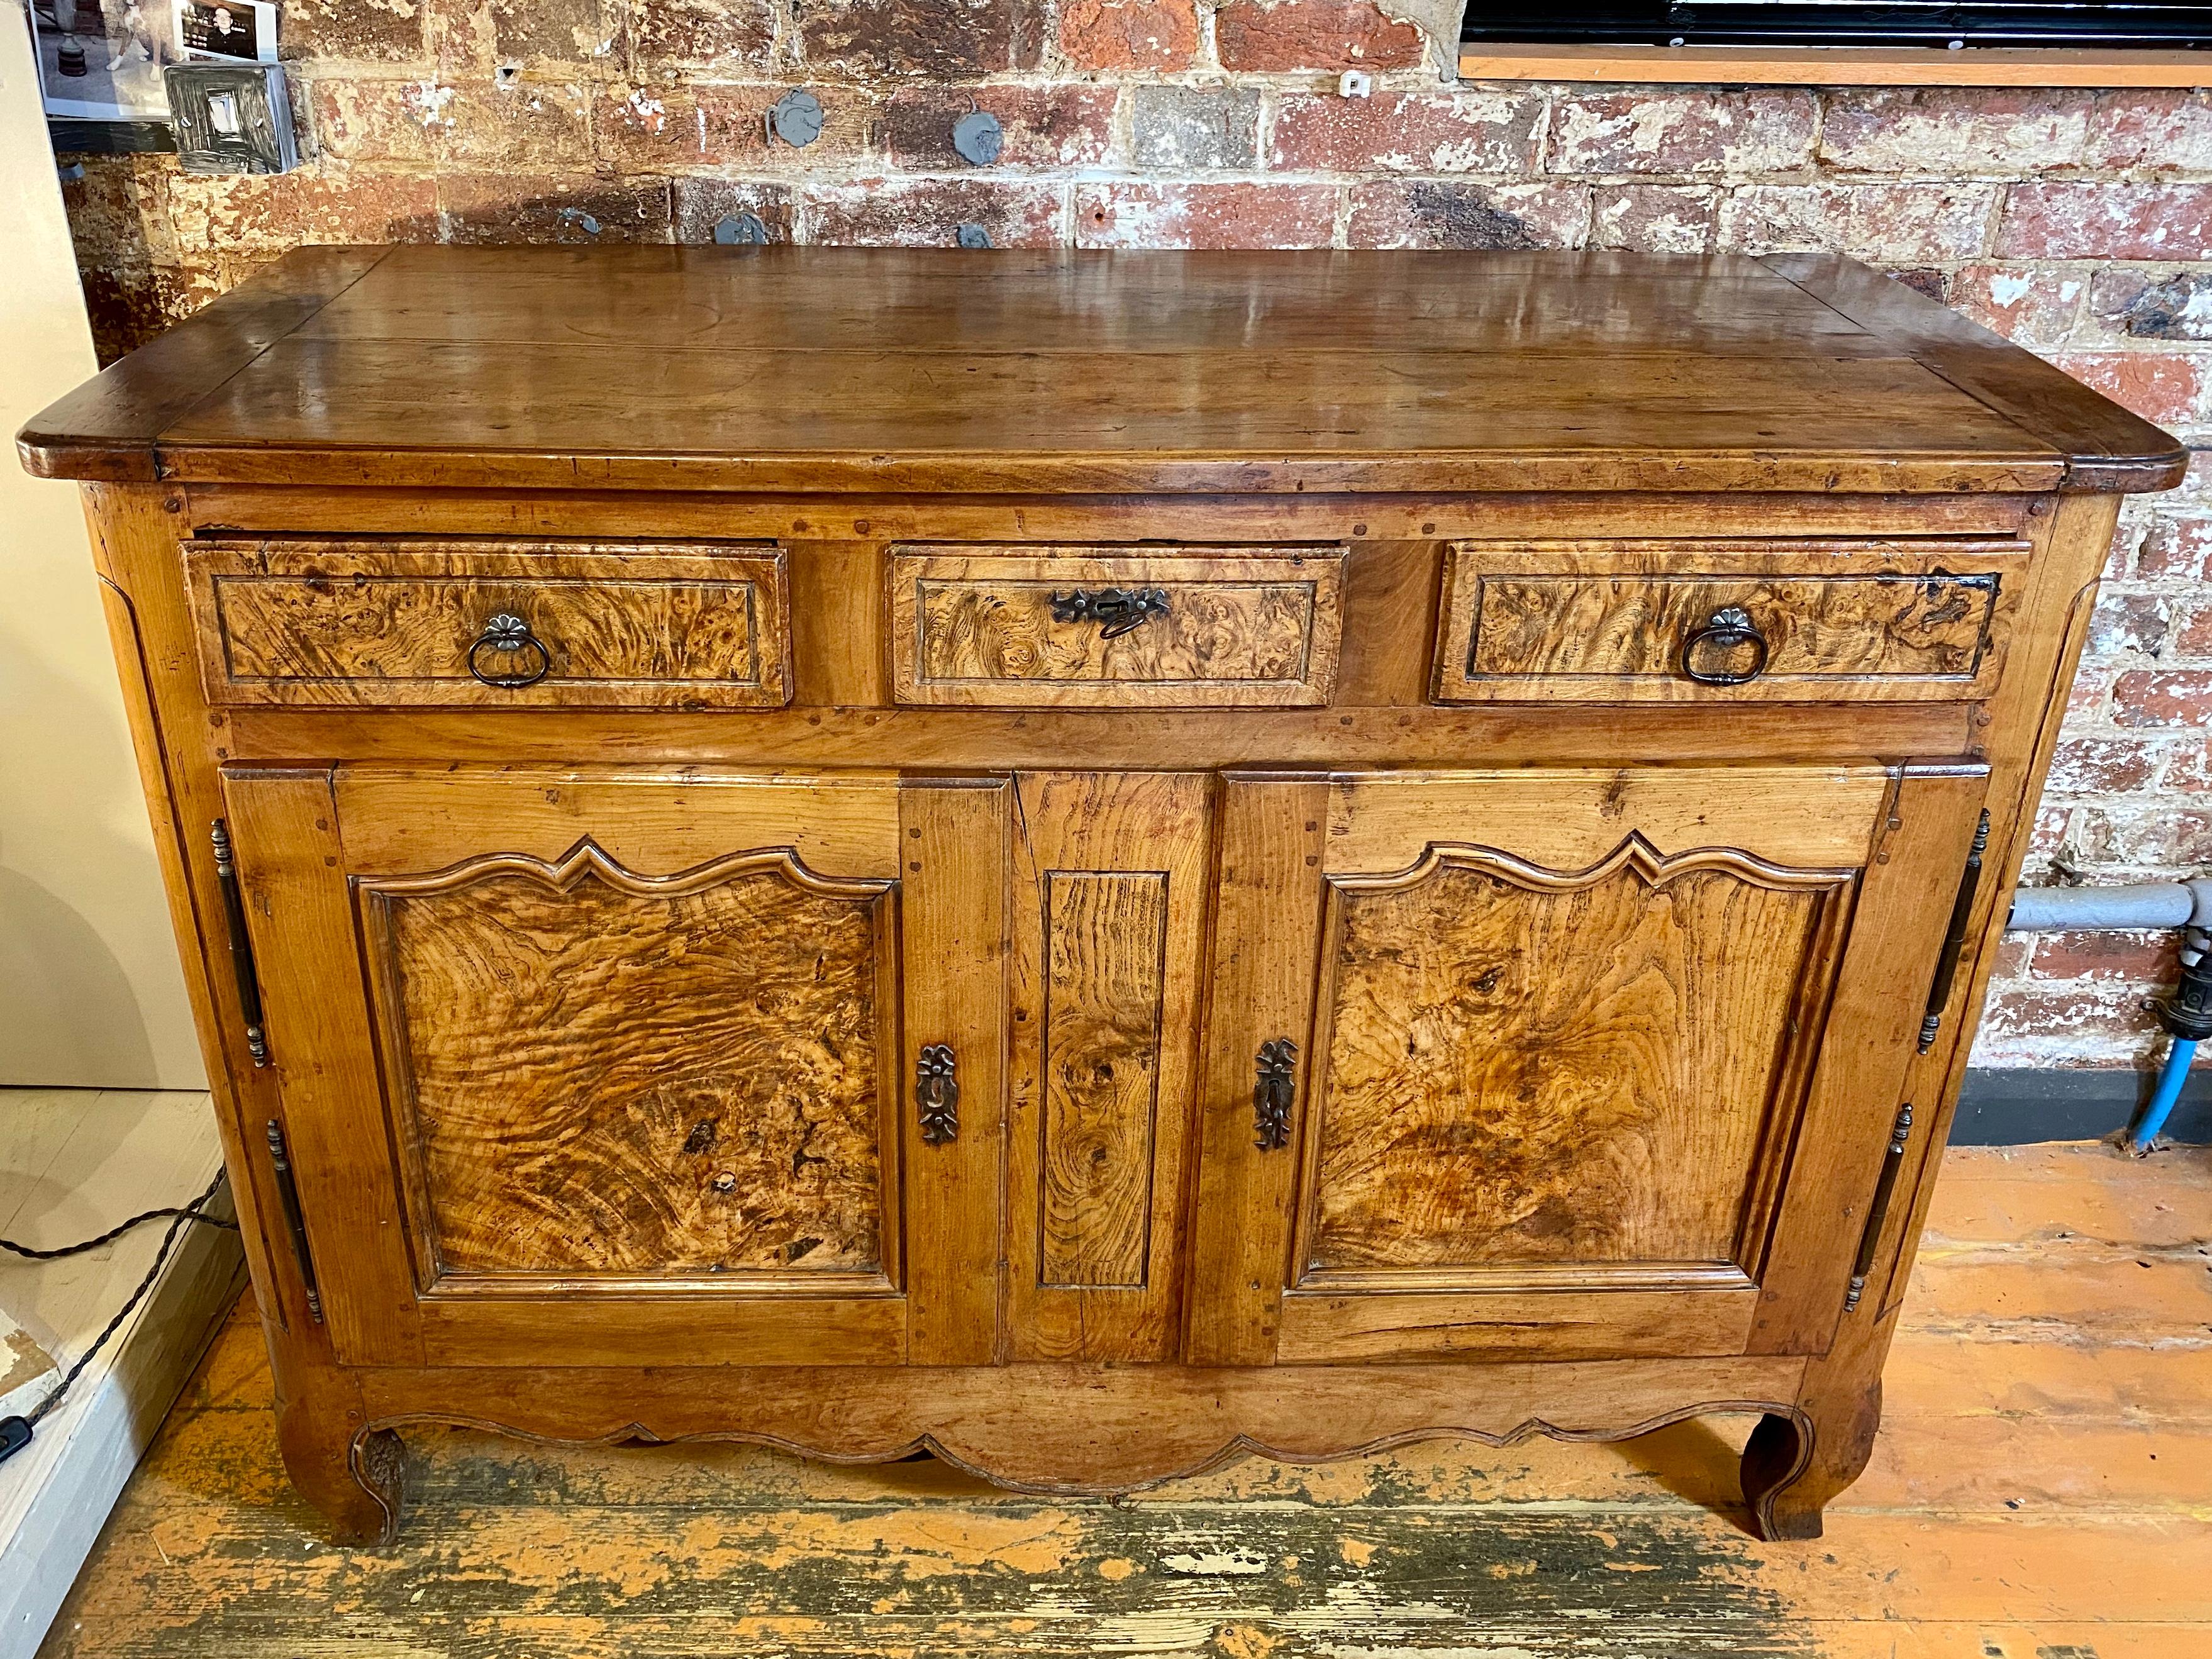 A strikingly beautiful and very practical early 19th century French cherry and elm buffet with three drawers over two cupboard doors. Original ironware. Excellent color and patina.
This piece would look great in a kitchen, hallway or living area.